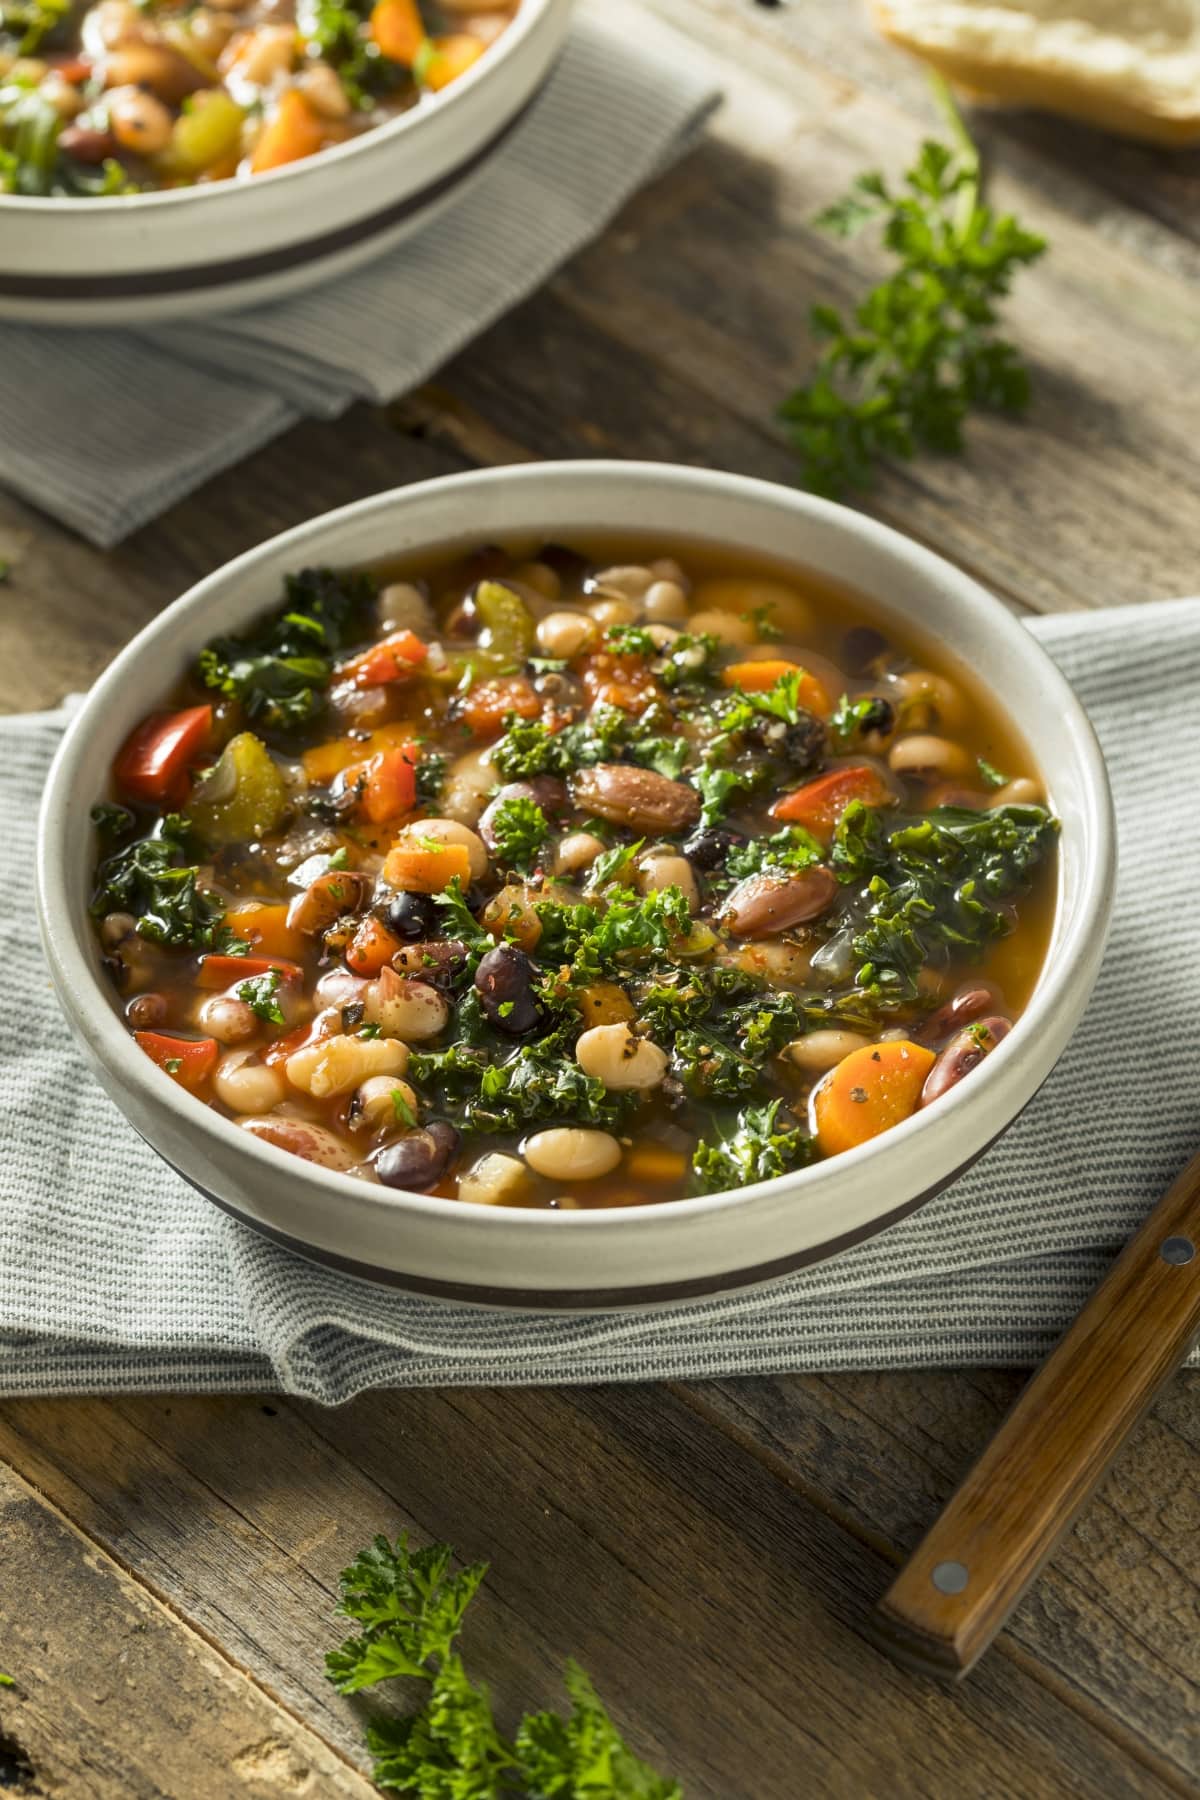 Bowl of Homemade Hearty and Healthy 10-Bean Soup with Vegetables